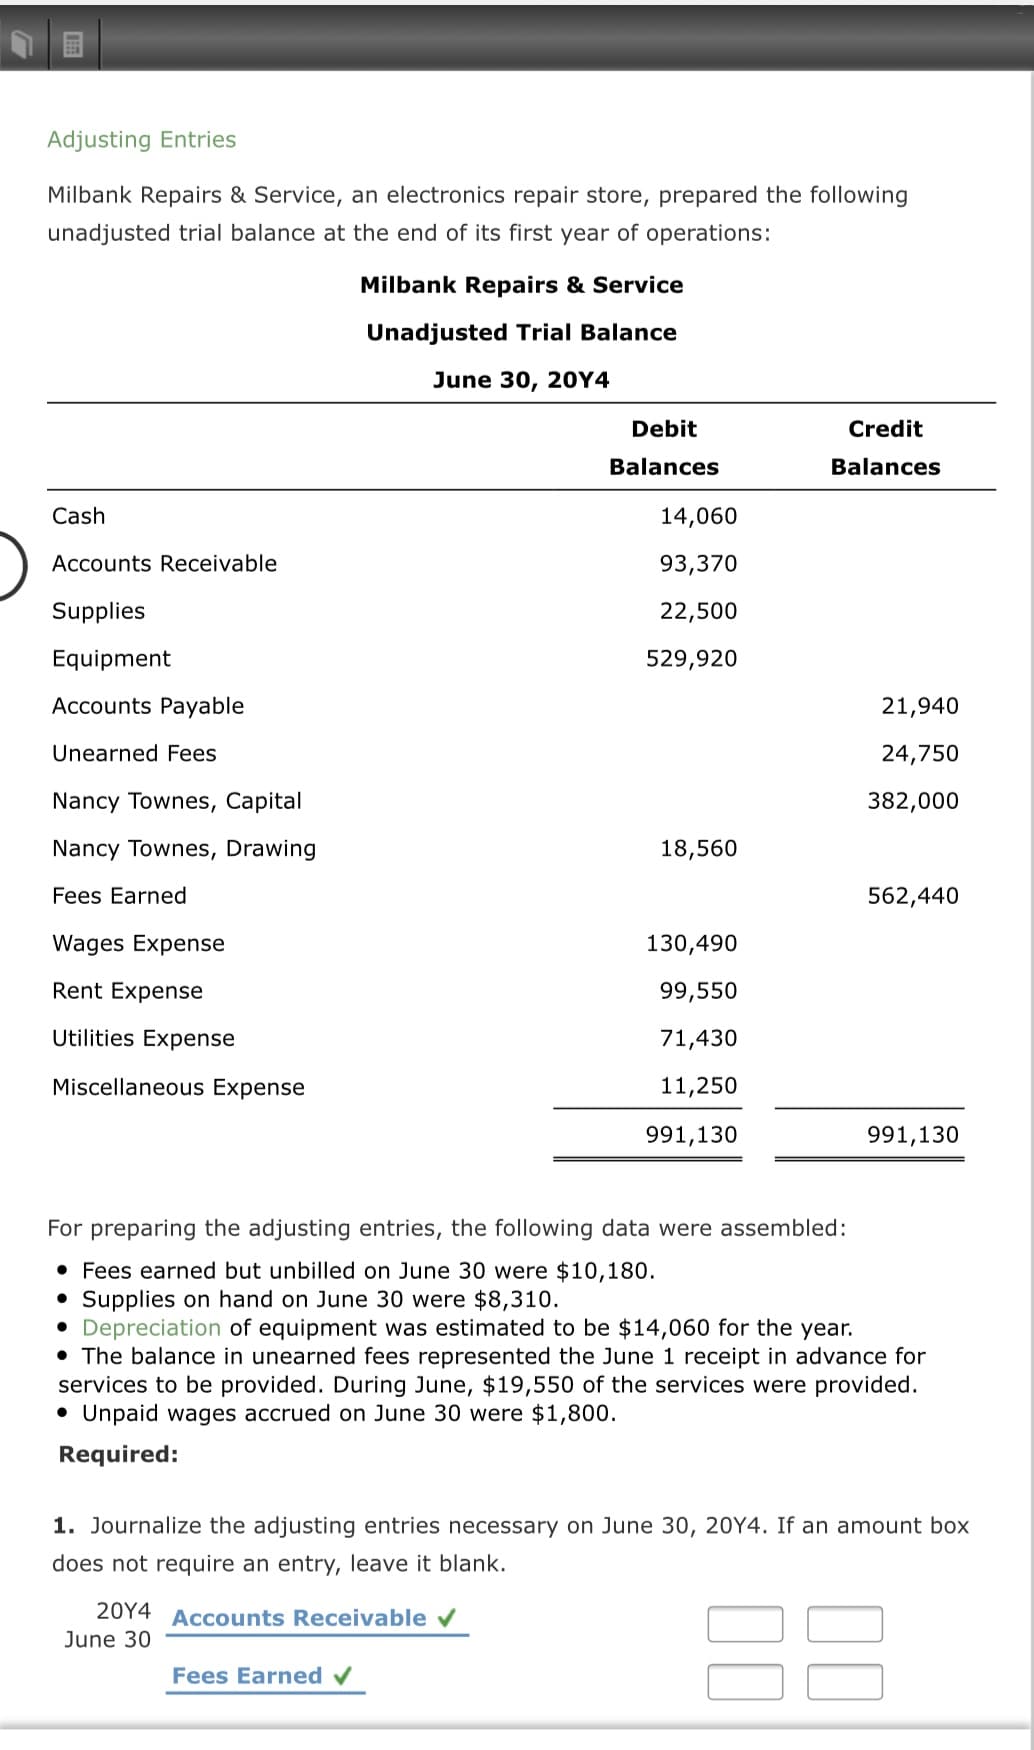 For preparing the adjusting entries, the following data were assembled:
• Fees earned but unbilled on June 30 were $10,180.
• Supplies on hand on June 30 were $8,310.
Depreciation of equipment was estimated to be $14,060 for the year.
• The balance in unearned fees represented the June 1 receipt in advance for
services to be provided. During June, $19,550 of the services were provided.
• Unpaid wages accrued on June 30 were $1,800.
Required:
1. Journalize the adjusting entries necessary on June 30, 20Y4. If an amount box
does not require an entry, leave it blank.
